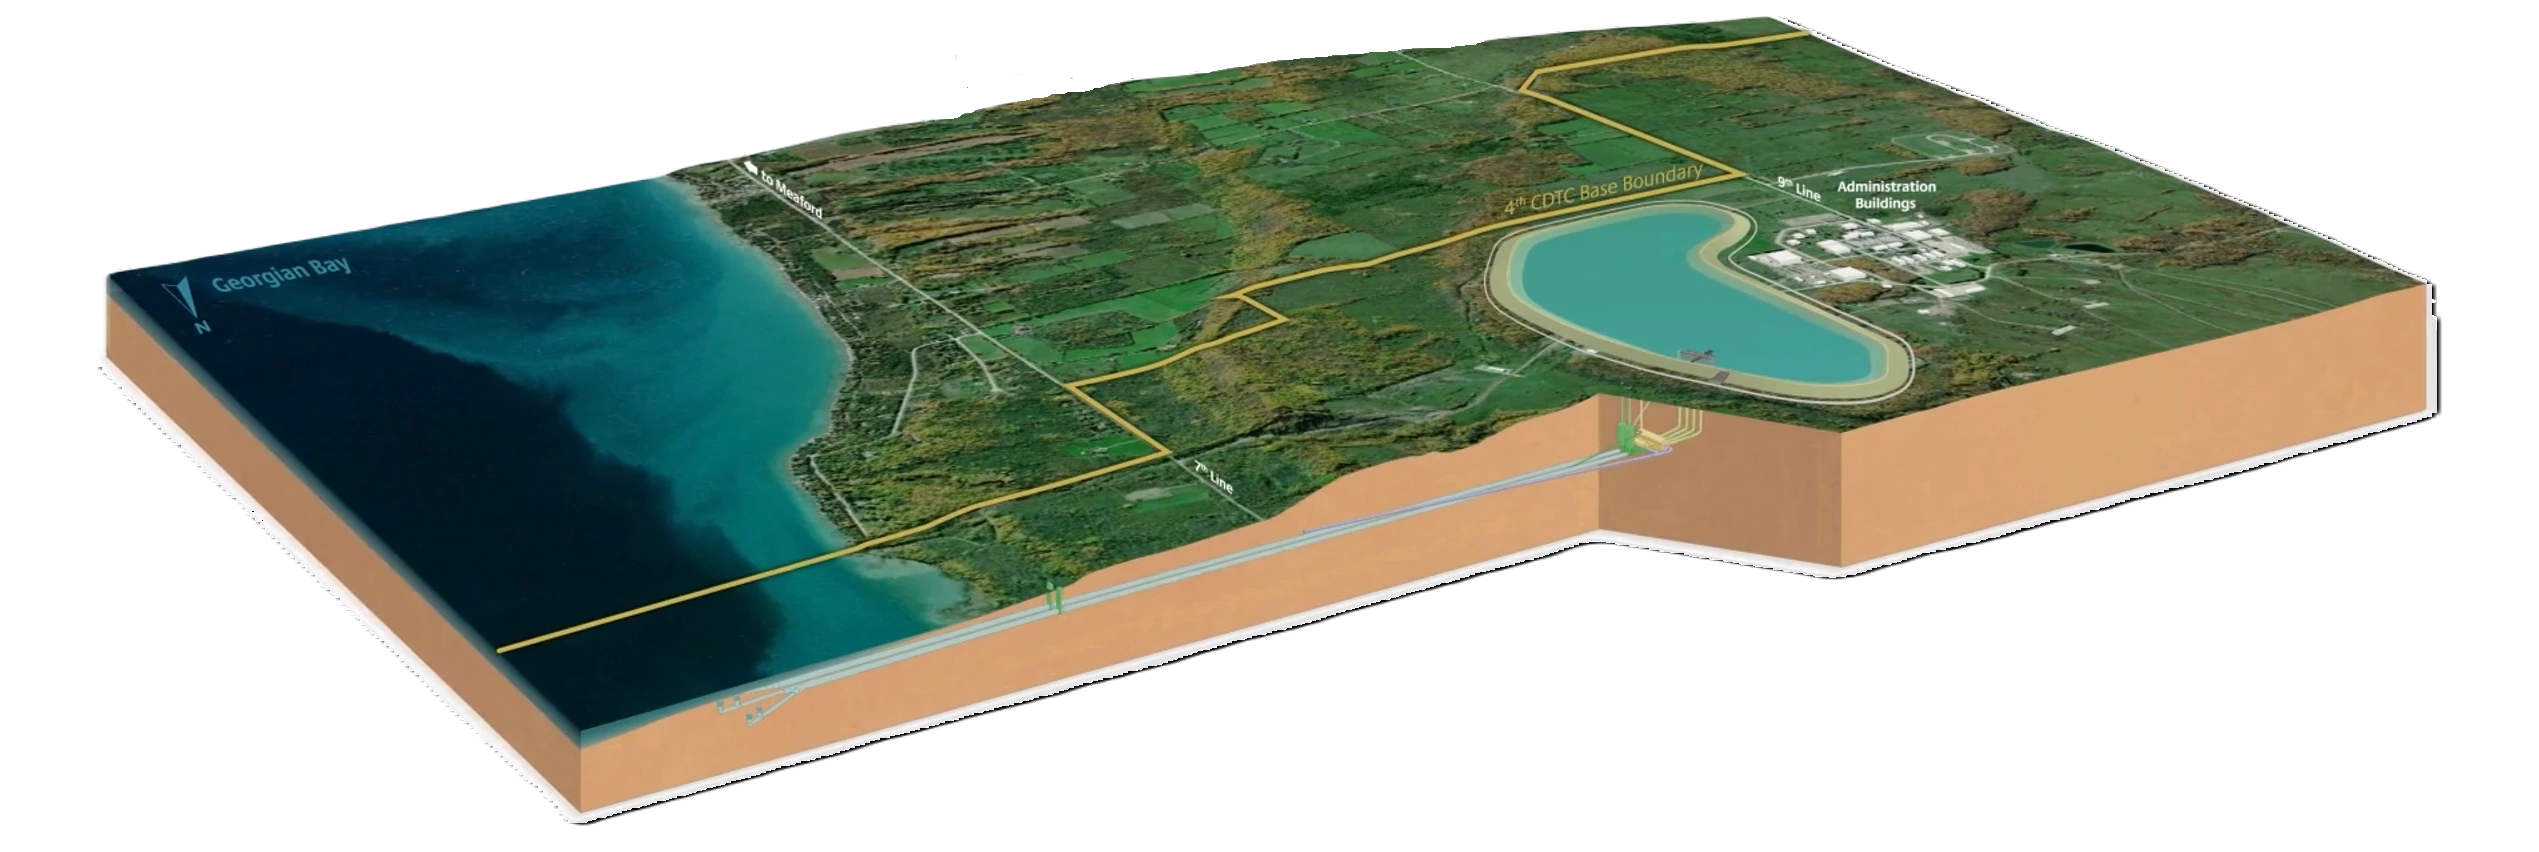 Proposed Hydro storage plant in Meaford